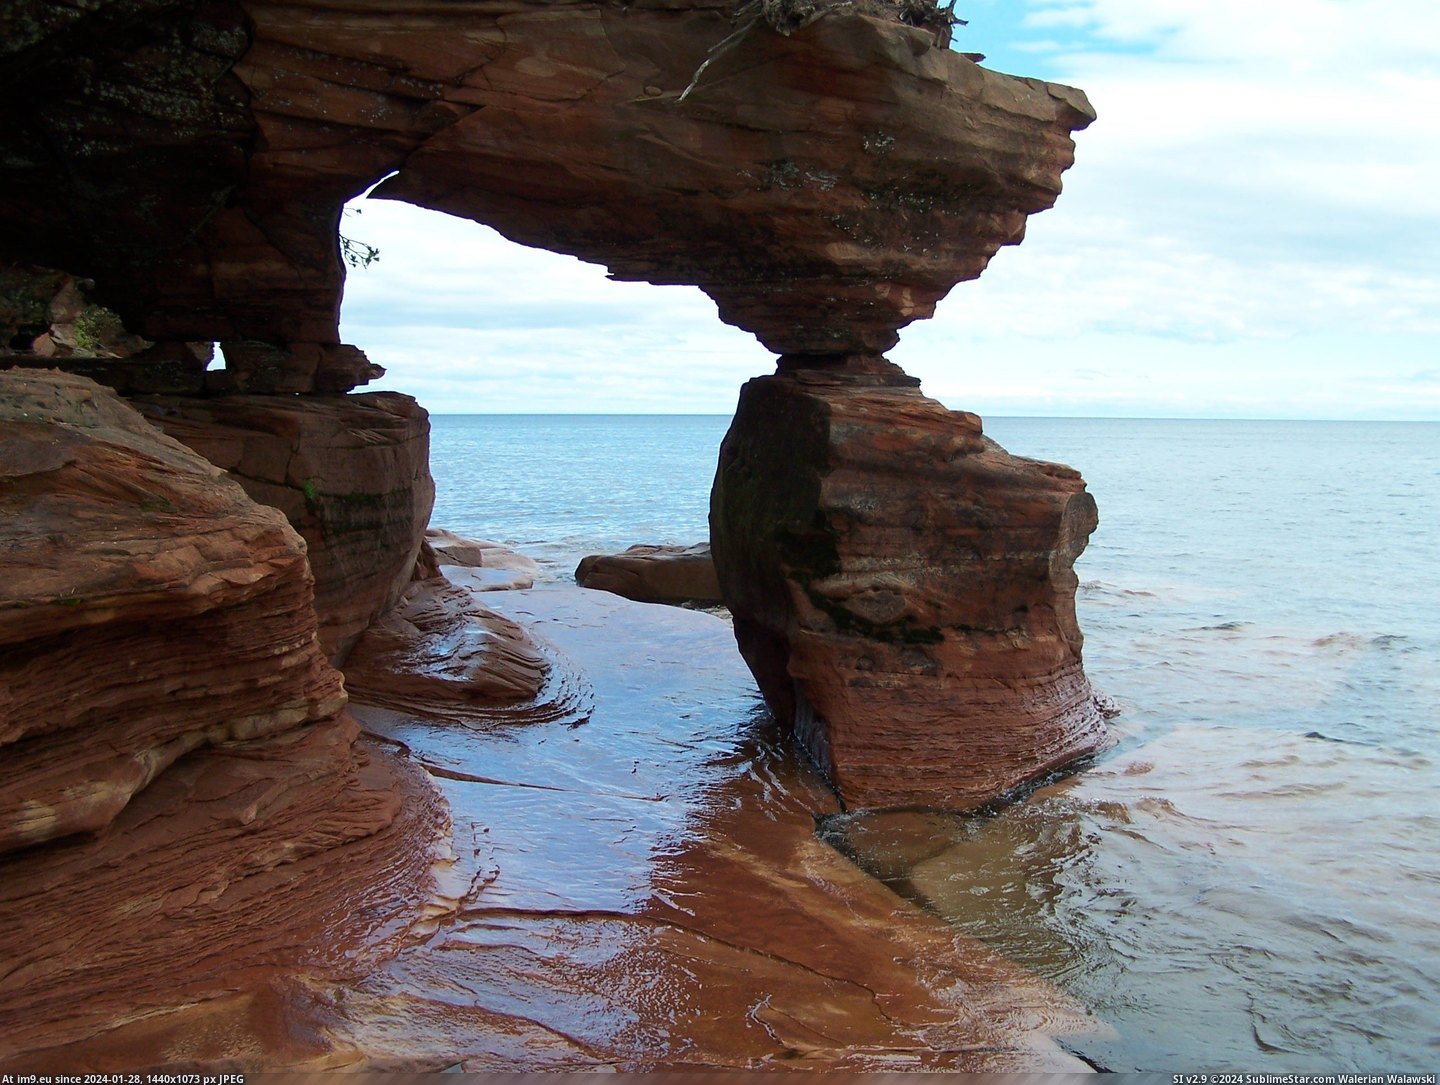 #National #Island #Sea #Wisconsin #Apostle #Lakeshore #2500x1900 #Sand #Islands #Arch [Earthporn] Sea Arch on Sand Island, Apostle Islands National Lakeshore, Wisconsin [2500X1900] [OC] Pic. (Изображение из альбом My r/EARTHPORN favs))